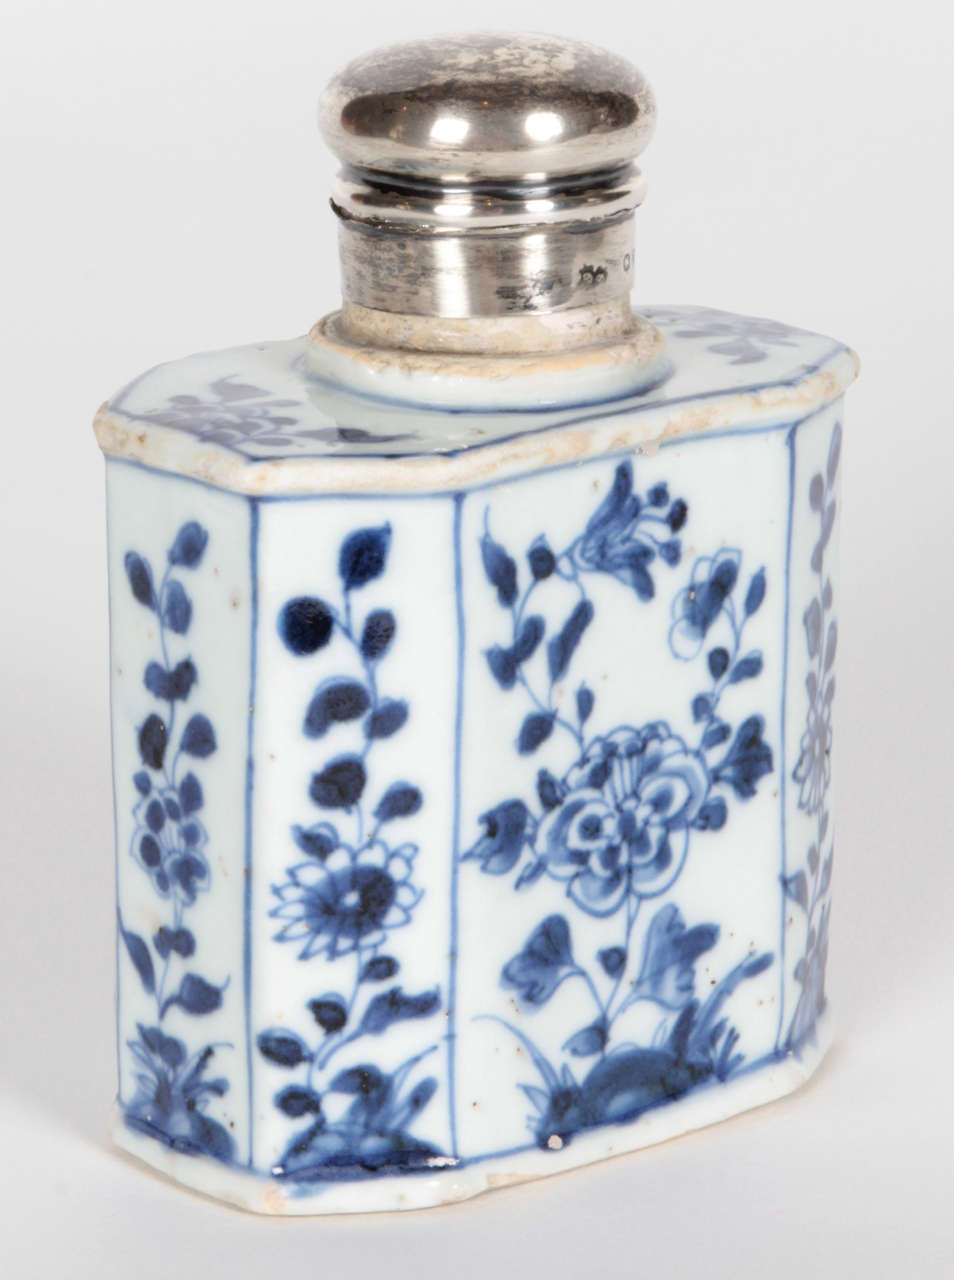 Chinese Export blue and white tea caddy with silver mount.
Ca. 1780